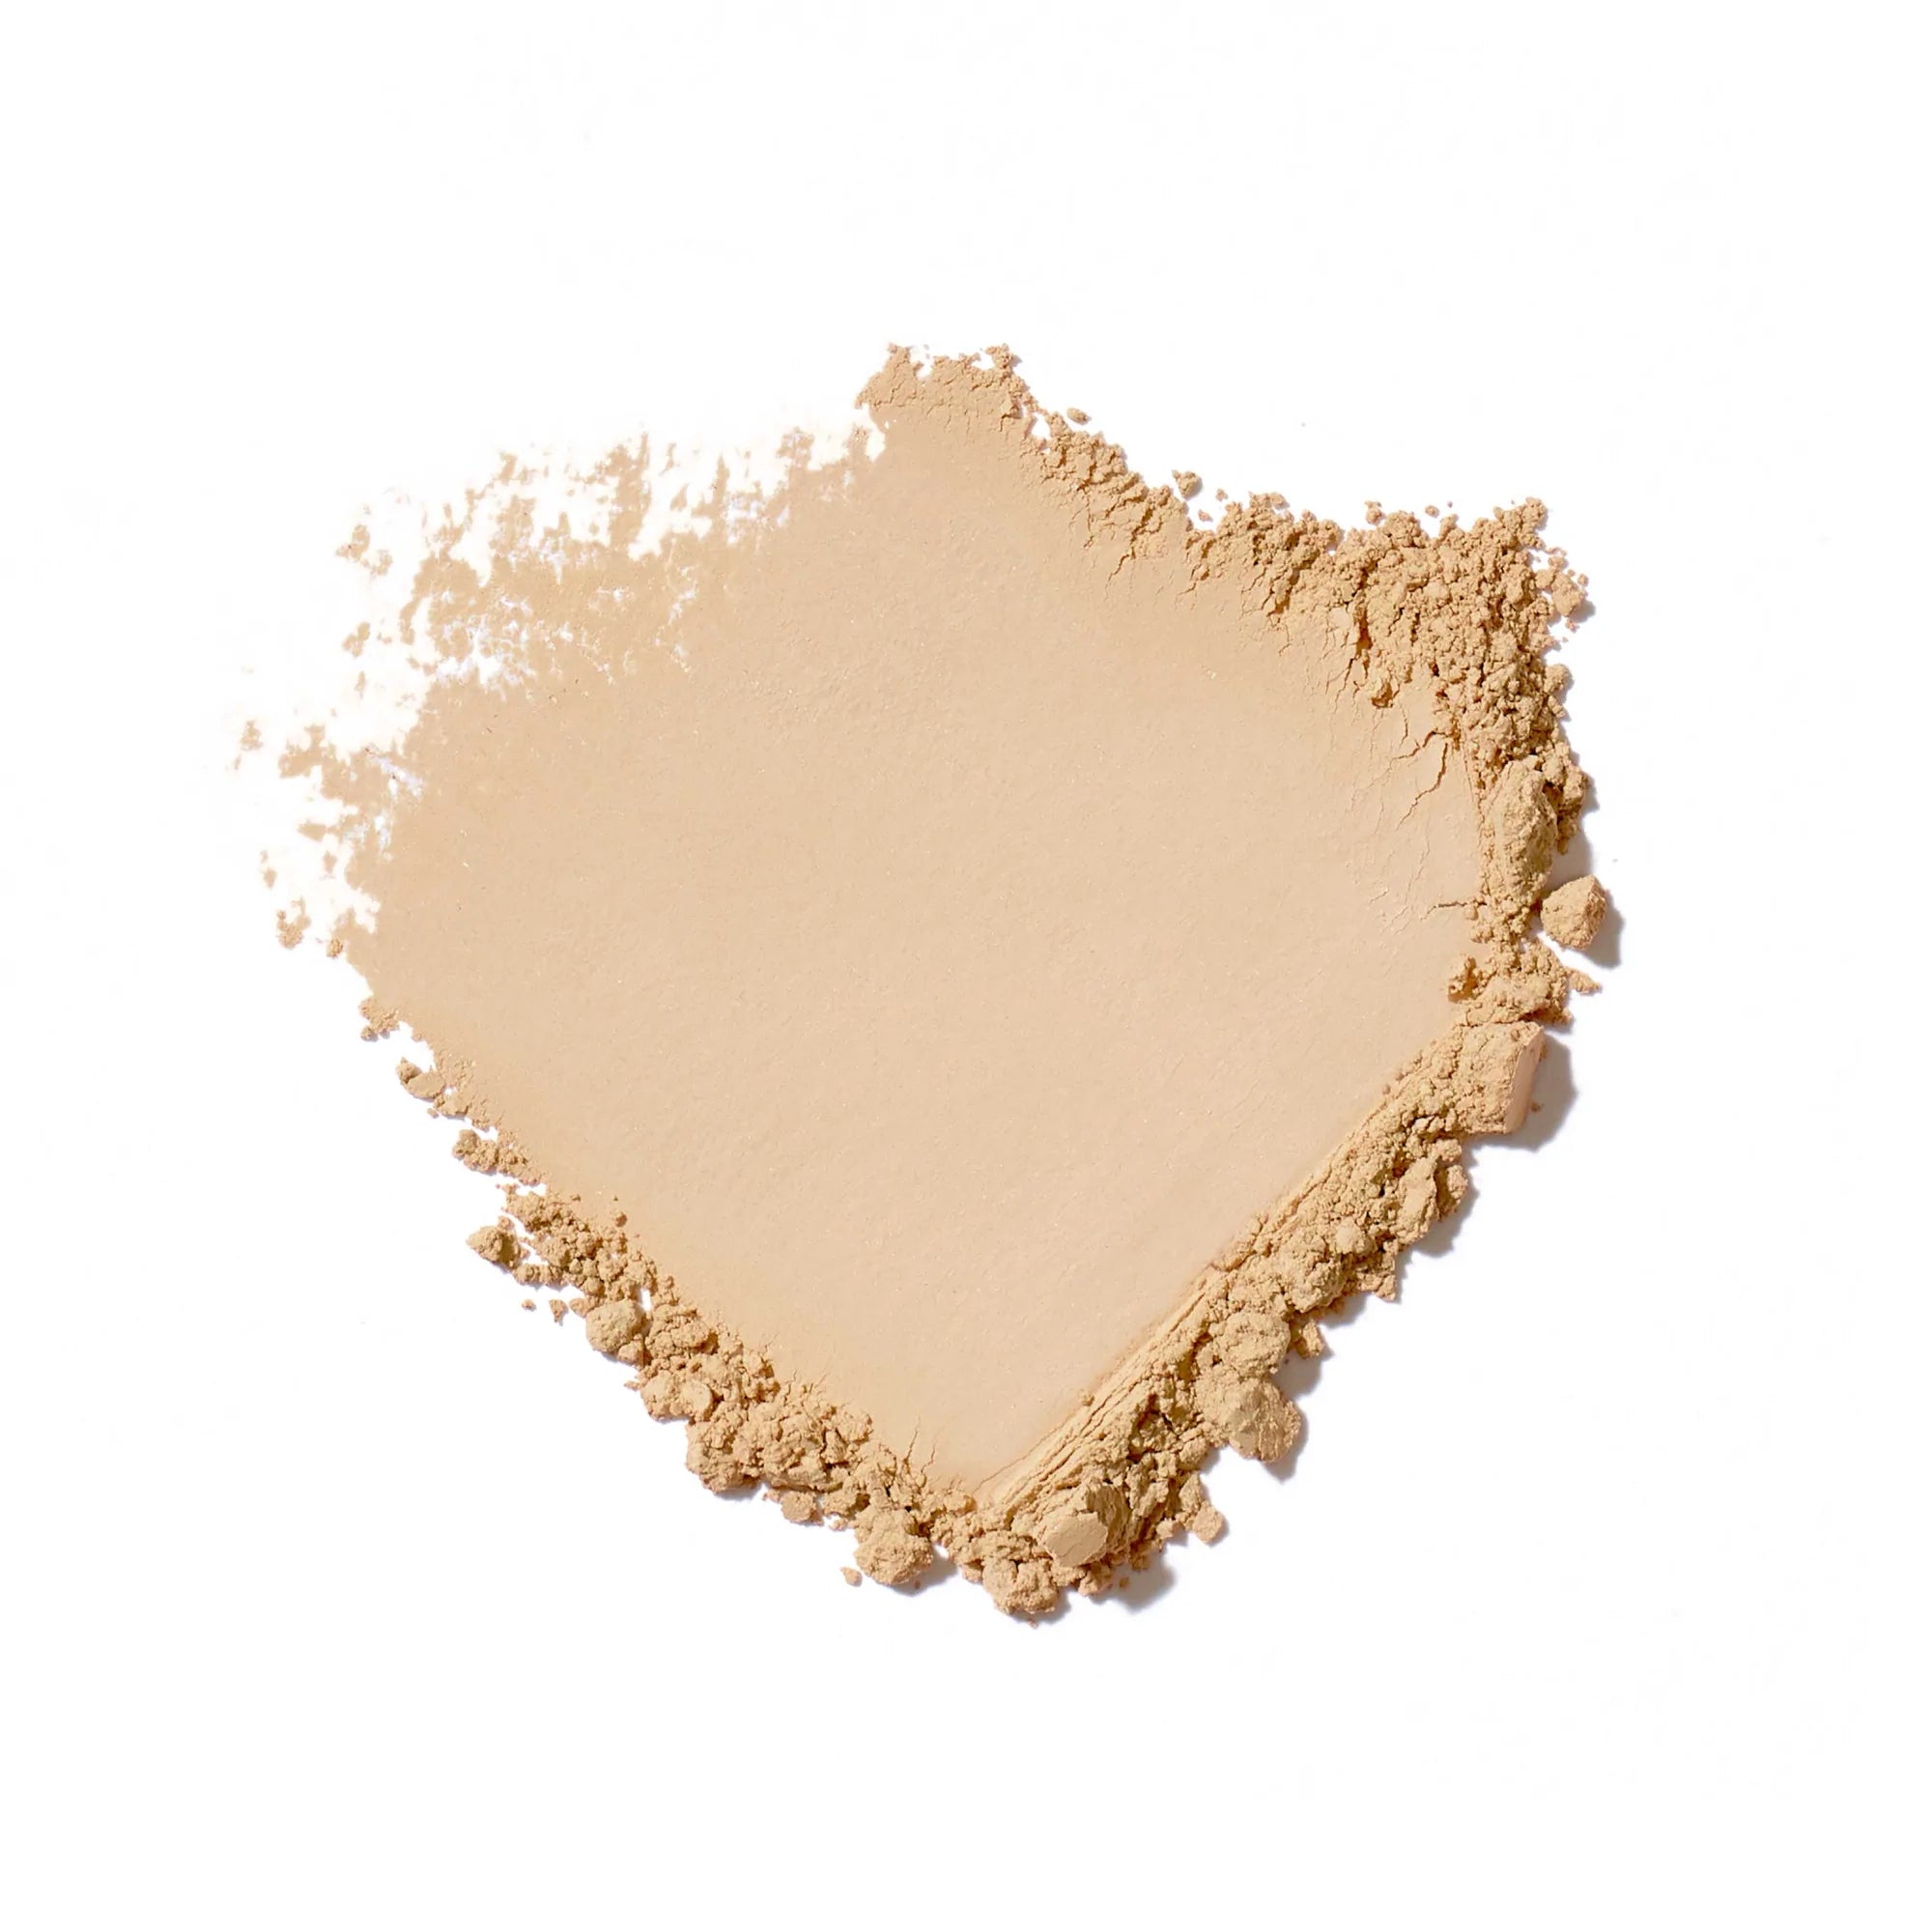 Amazing Base® Loose Mineral Powder SPF 20/15 [Best Before: Jan 2025]